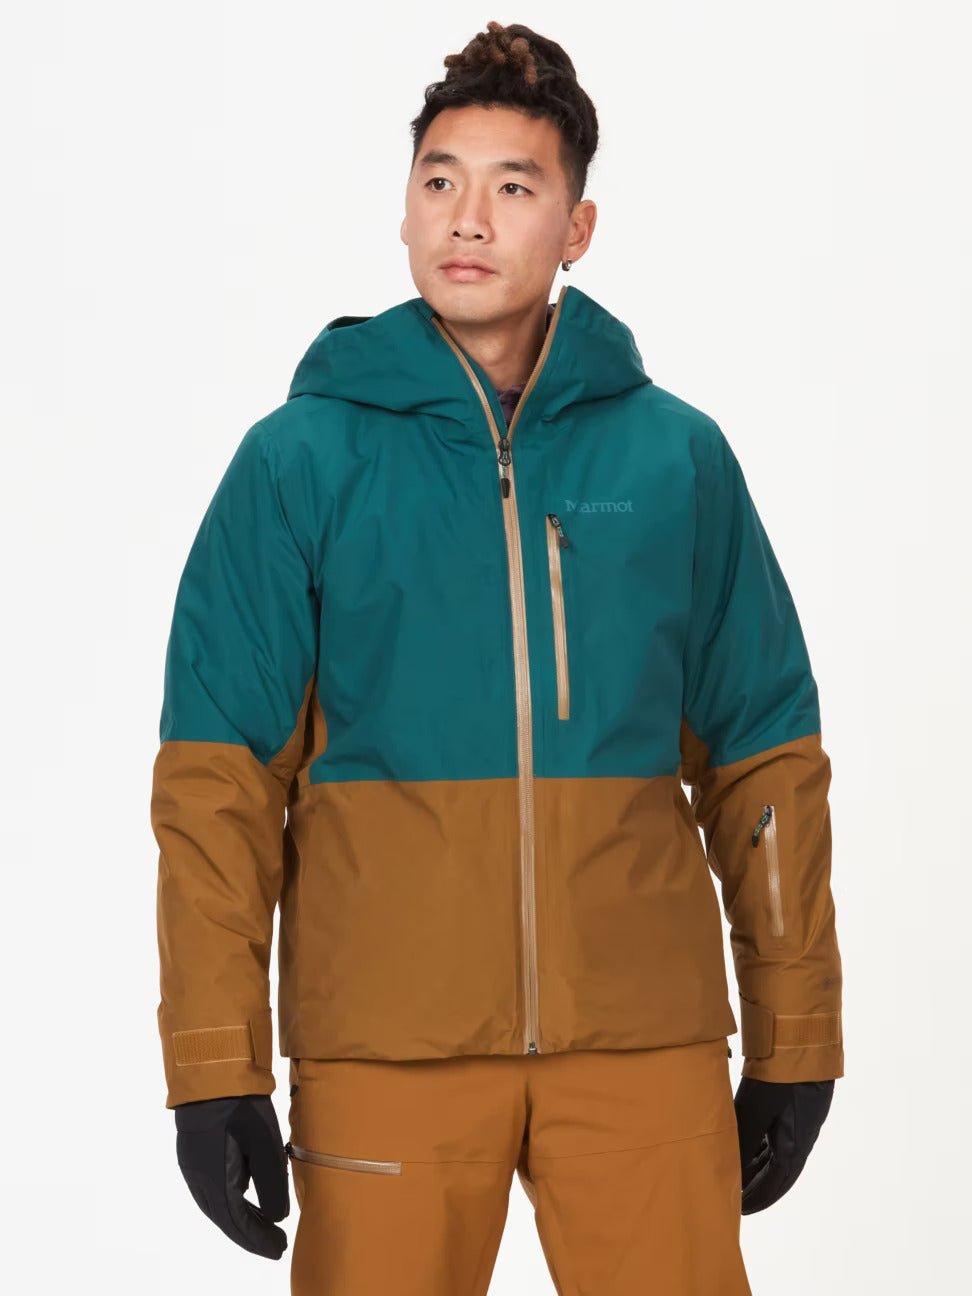 Boone Mountain Sports - M LIGHTRAY GORE-TEX JACKET